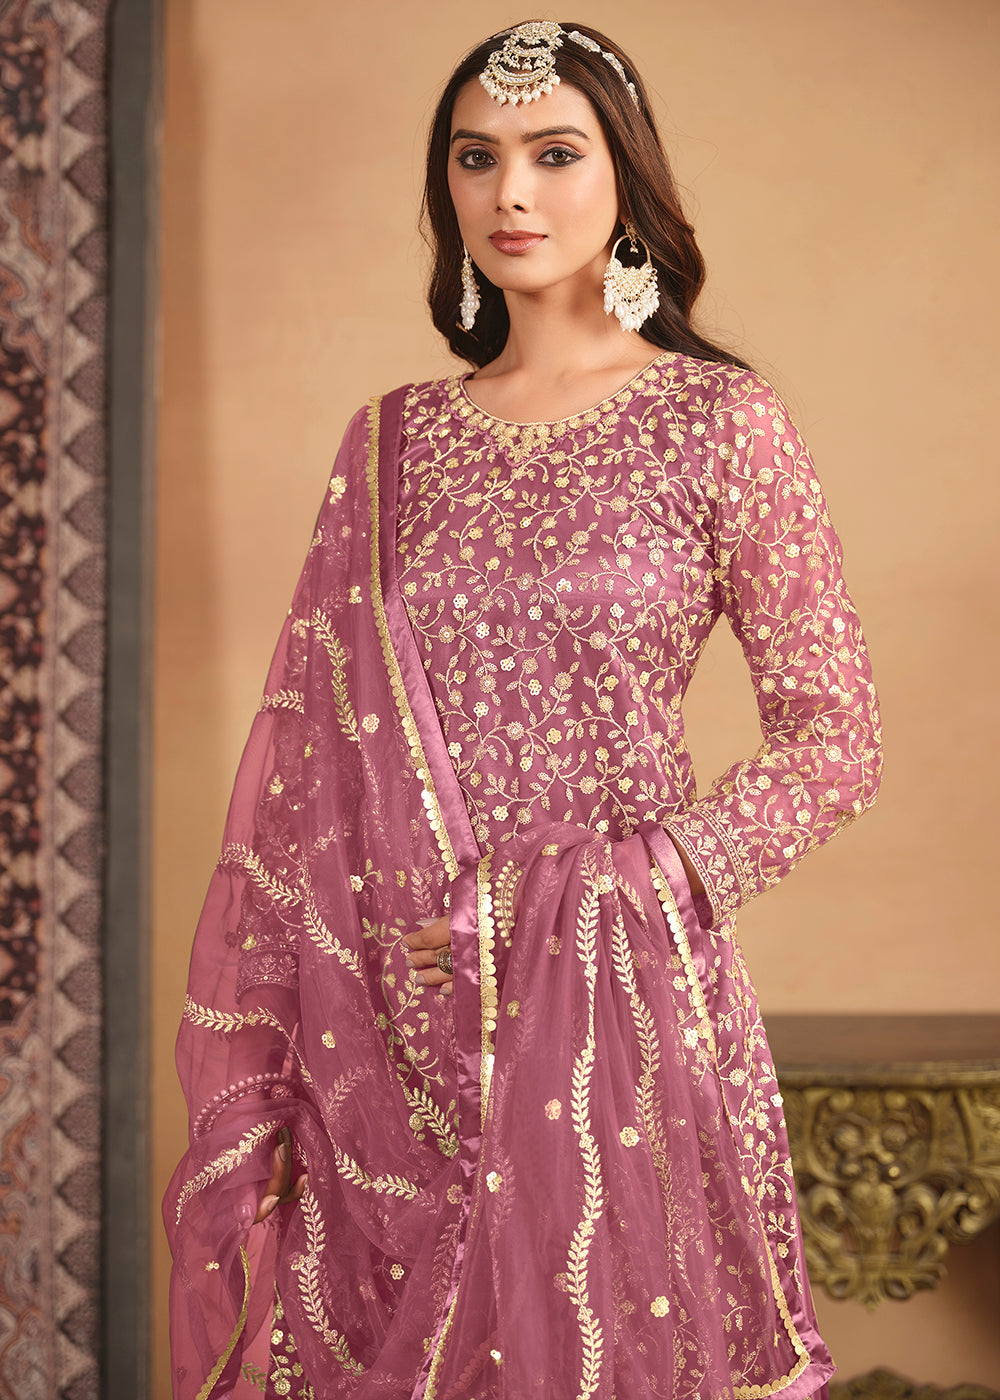 Shop Now Net Onion Pink Embroidered Gharara Style Suit Online at Empress Clothing in USA, UK, Canada, Italy & Worldwide. 